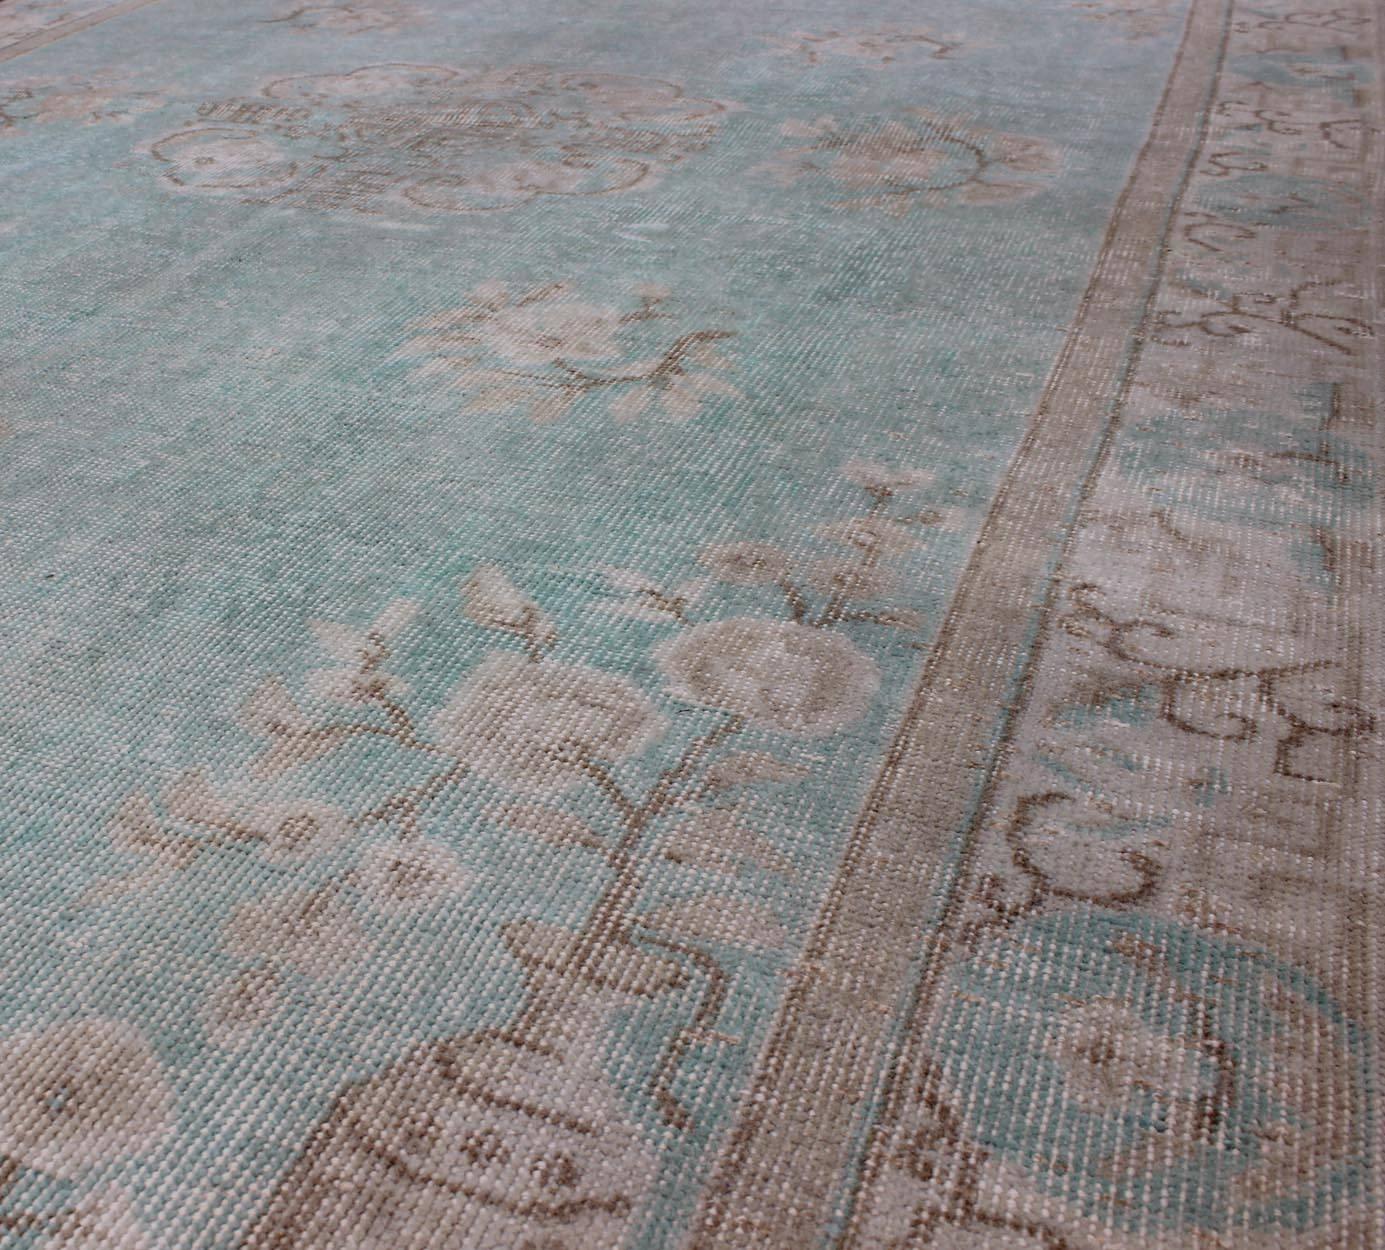 Mid-20th Century Vintage Turkish Rug with Khotan Design in Sea Foam Blue, Taupe and Light Brown For Sale